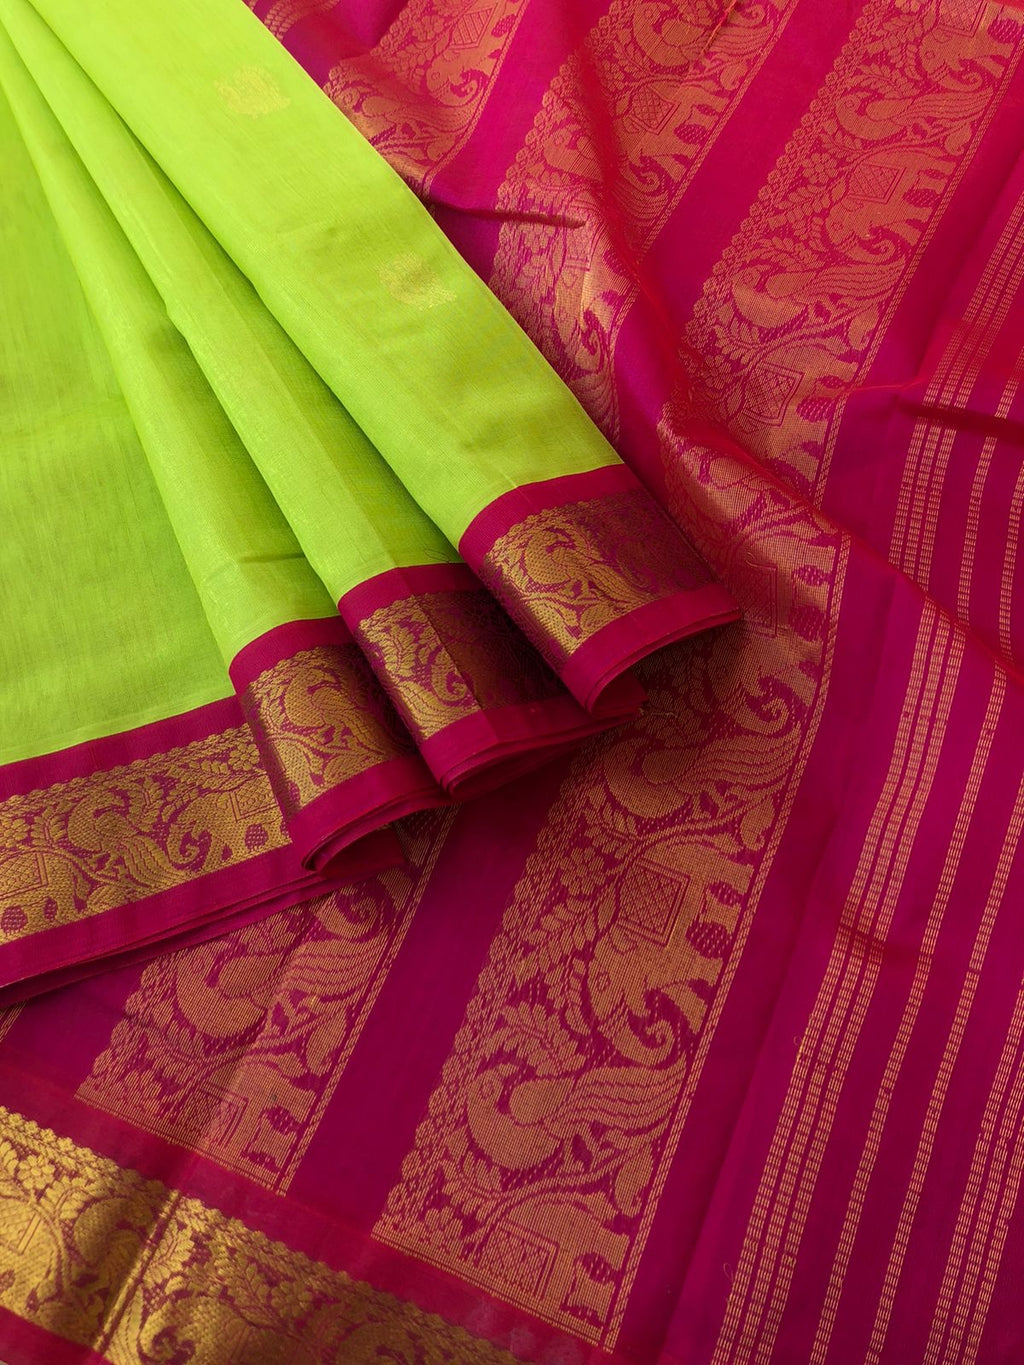 Bliss of Korvai Silk Cottons - fresh green mixed yellow and reddish pink